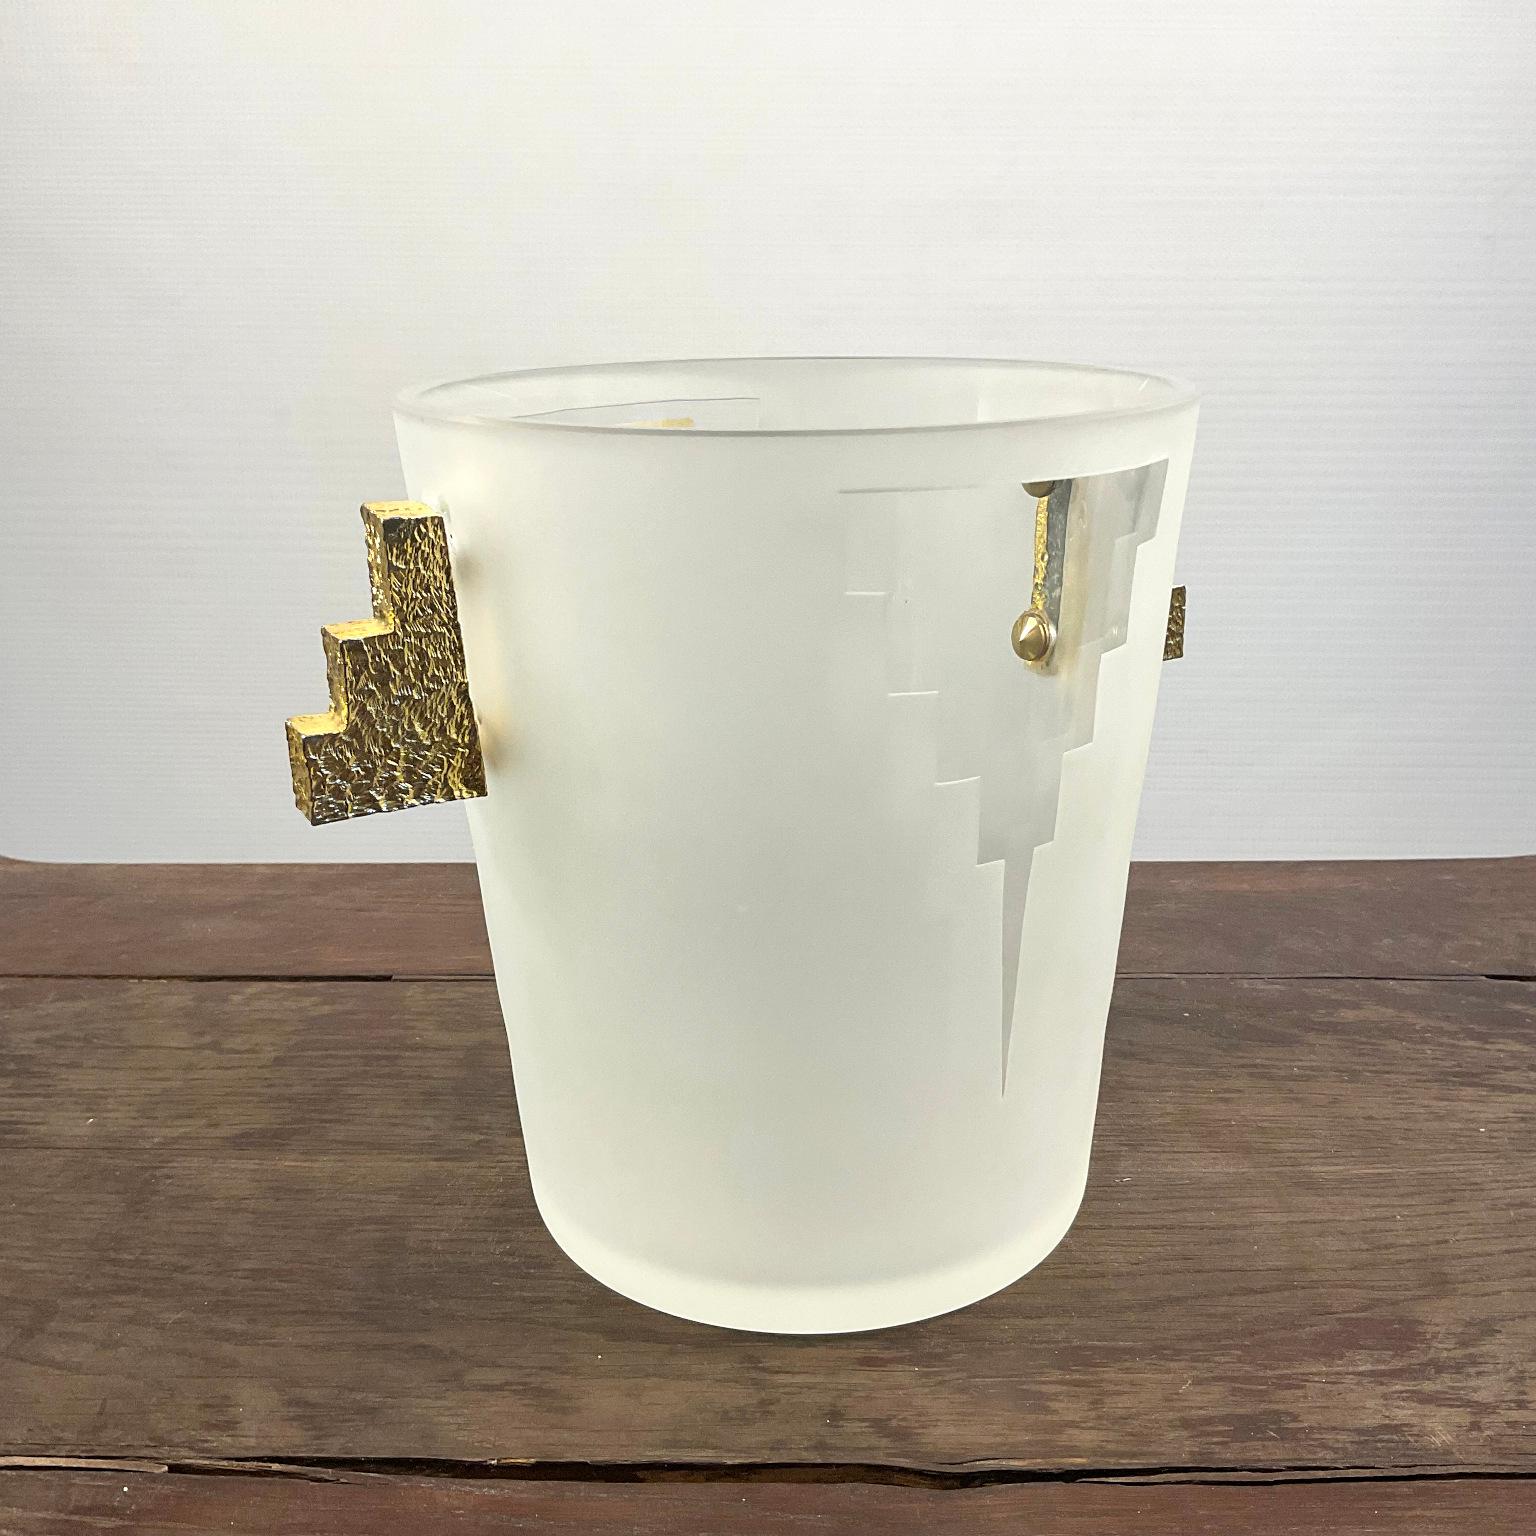 Hollywood Regency 1980s Pierre Casenove Wine Cooler or Champagne Bucket for La Rochere France For Sale